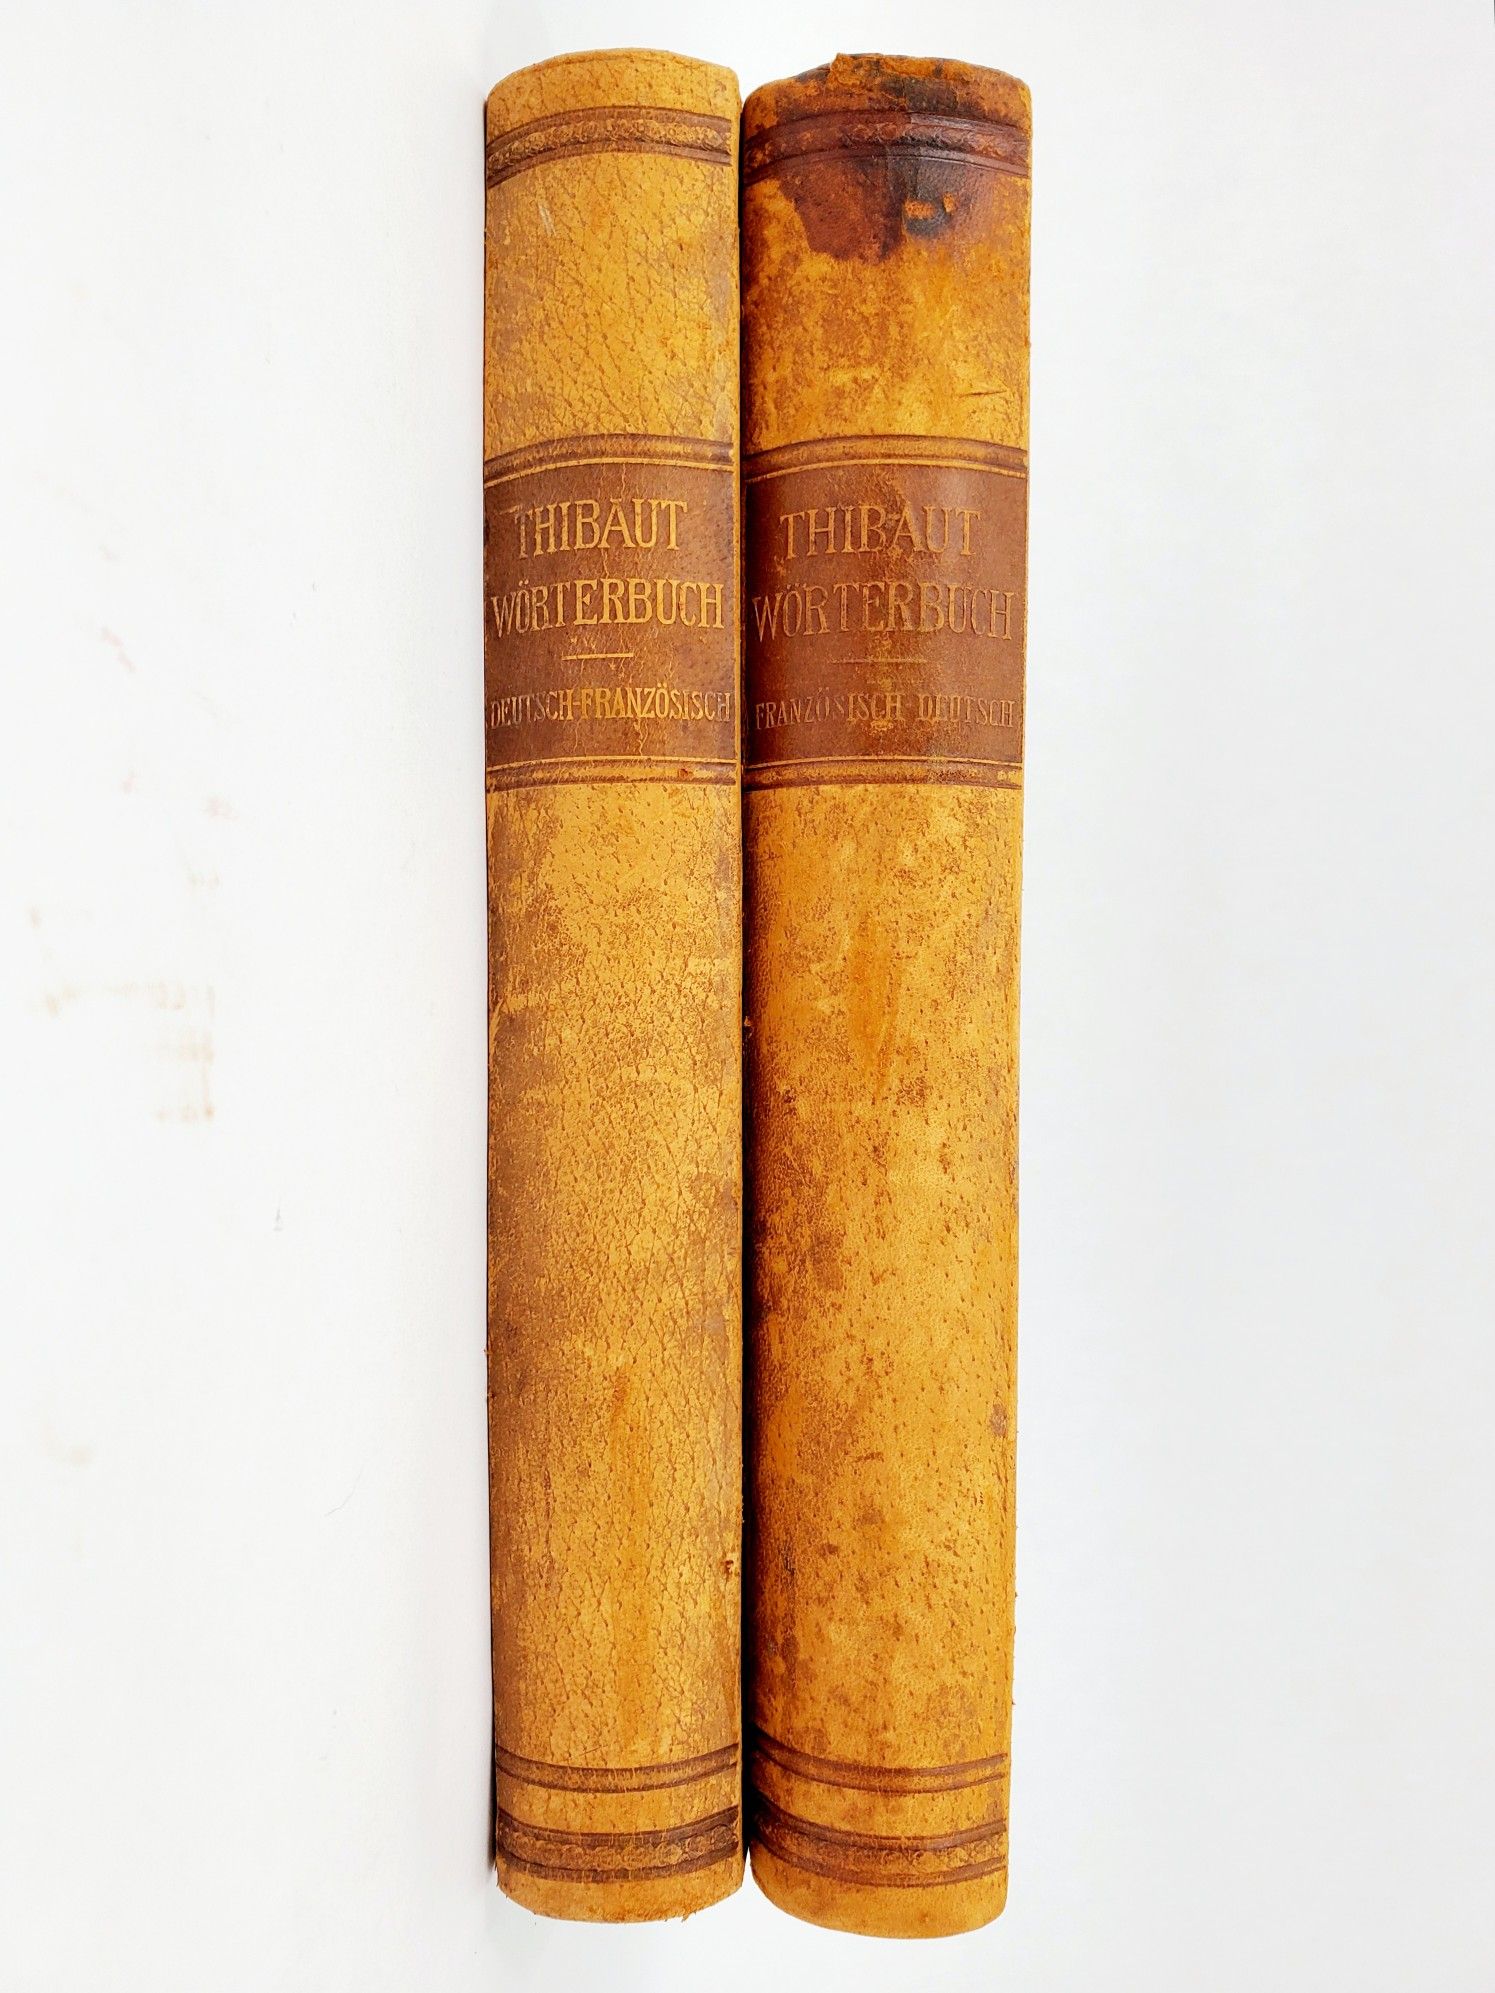 M. A. Thibaut French-German/German-French (Two Volume) Dictionary Worterbuch 1907 Hardcover